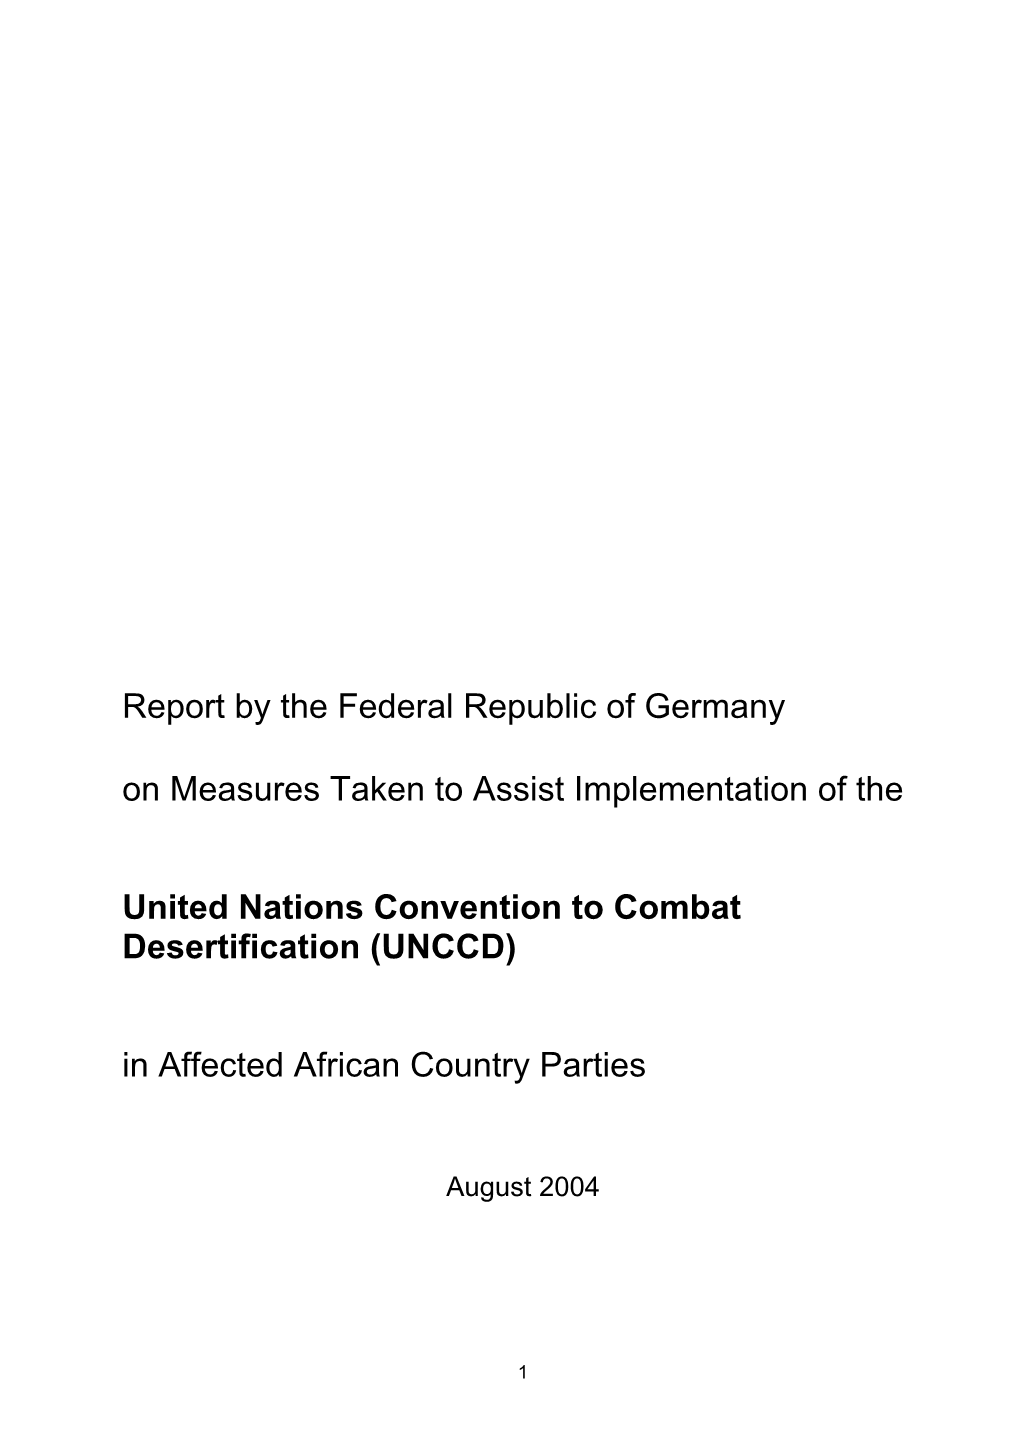 Report by the Federal Republic of Germany on Measures Taken To